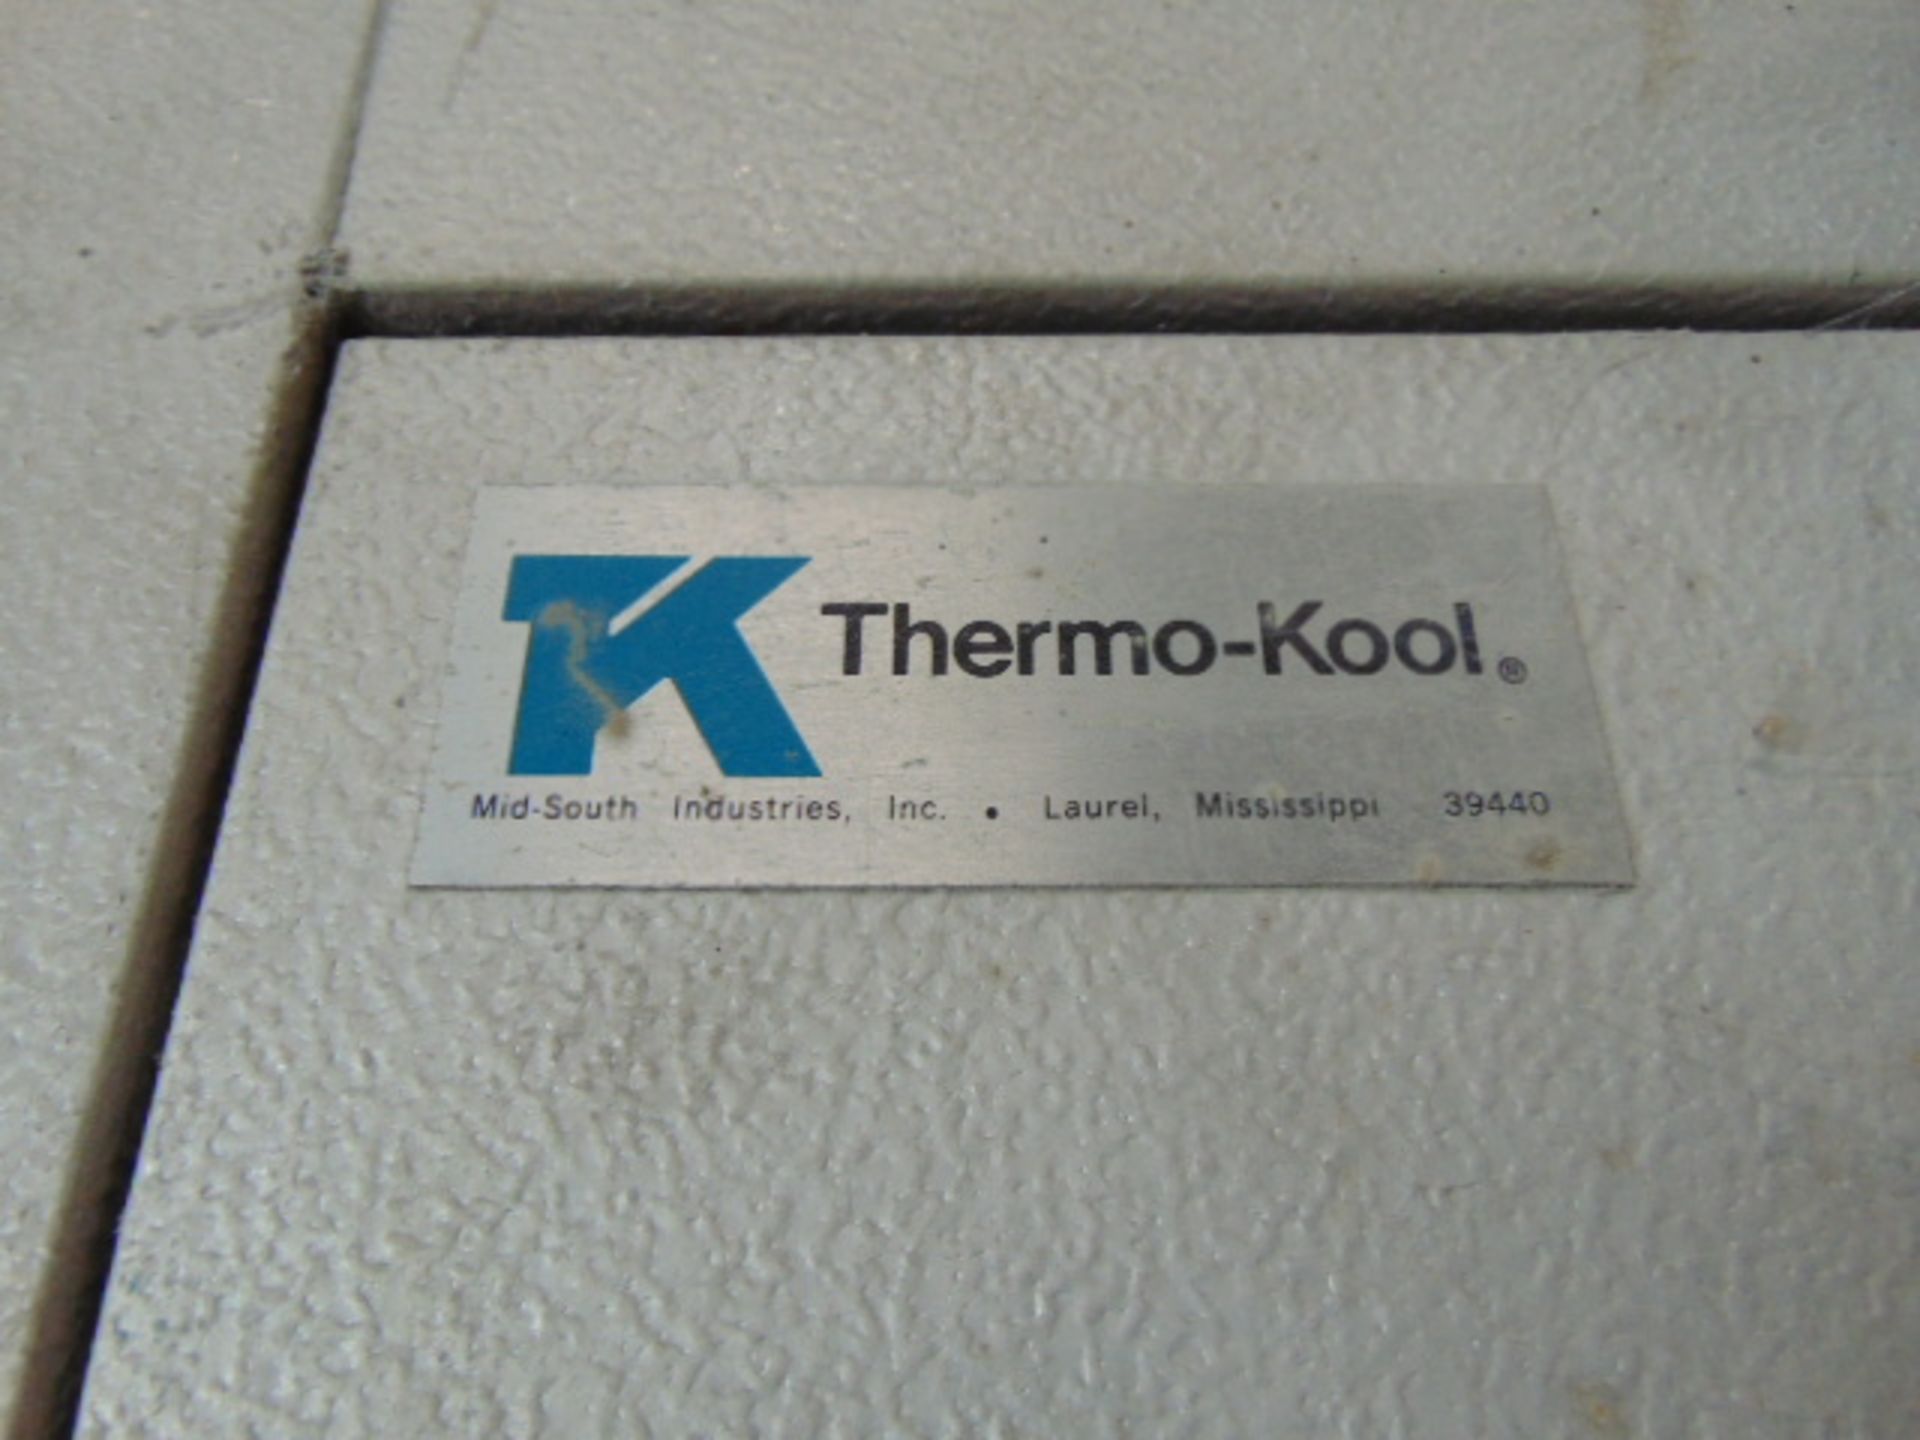 THERMAL-KOOL WALK-IN COOLER, approx. 6’W. x 12’ dp., unitized chiller, insulated panel - Image 3 of 7